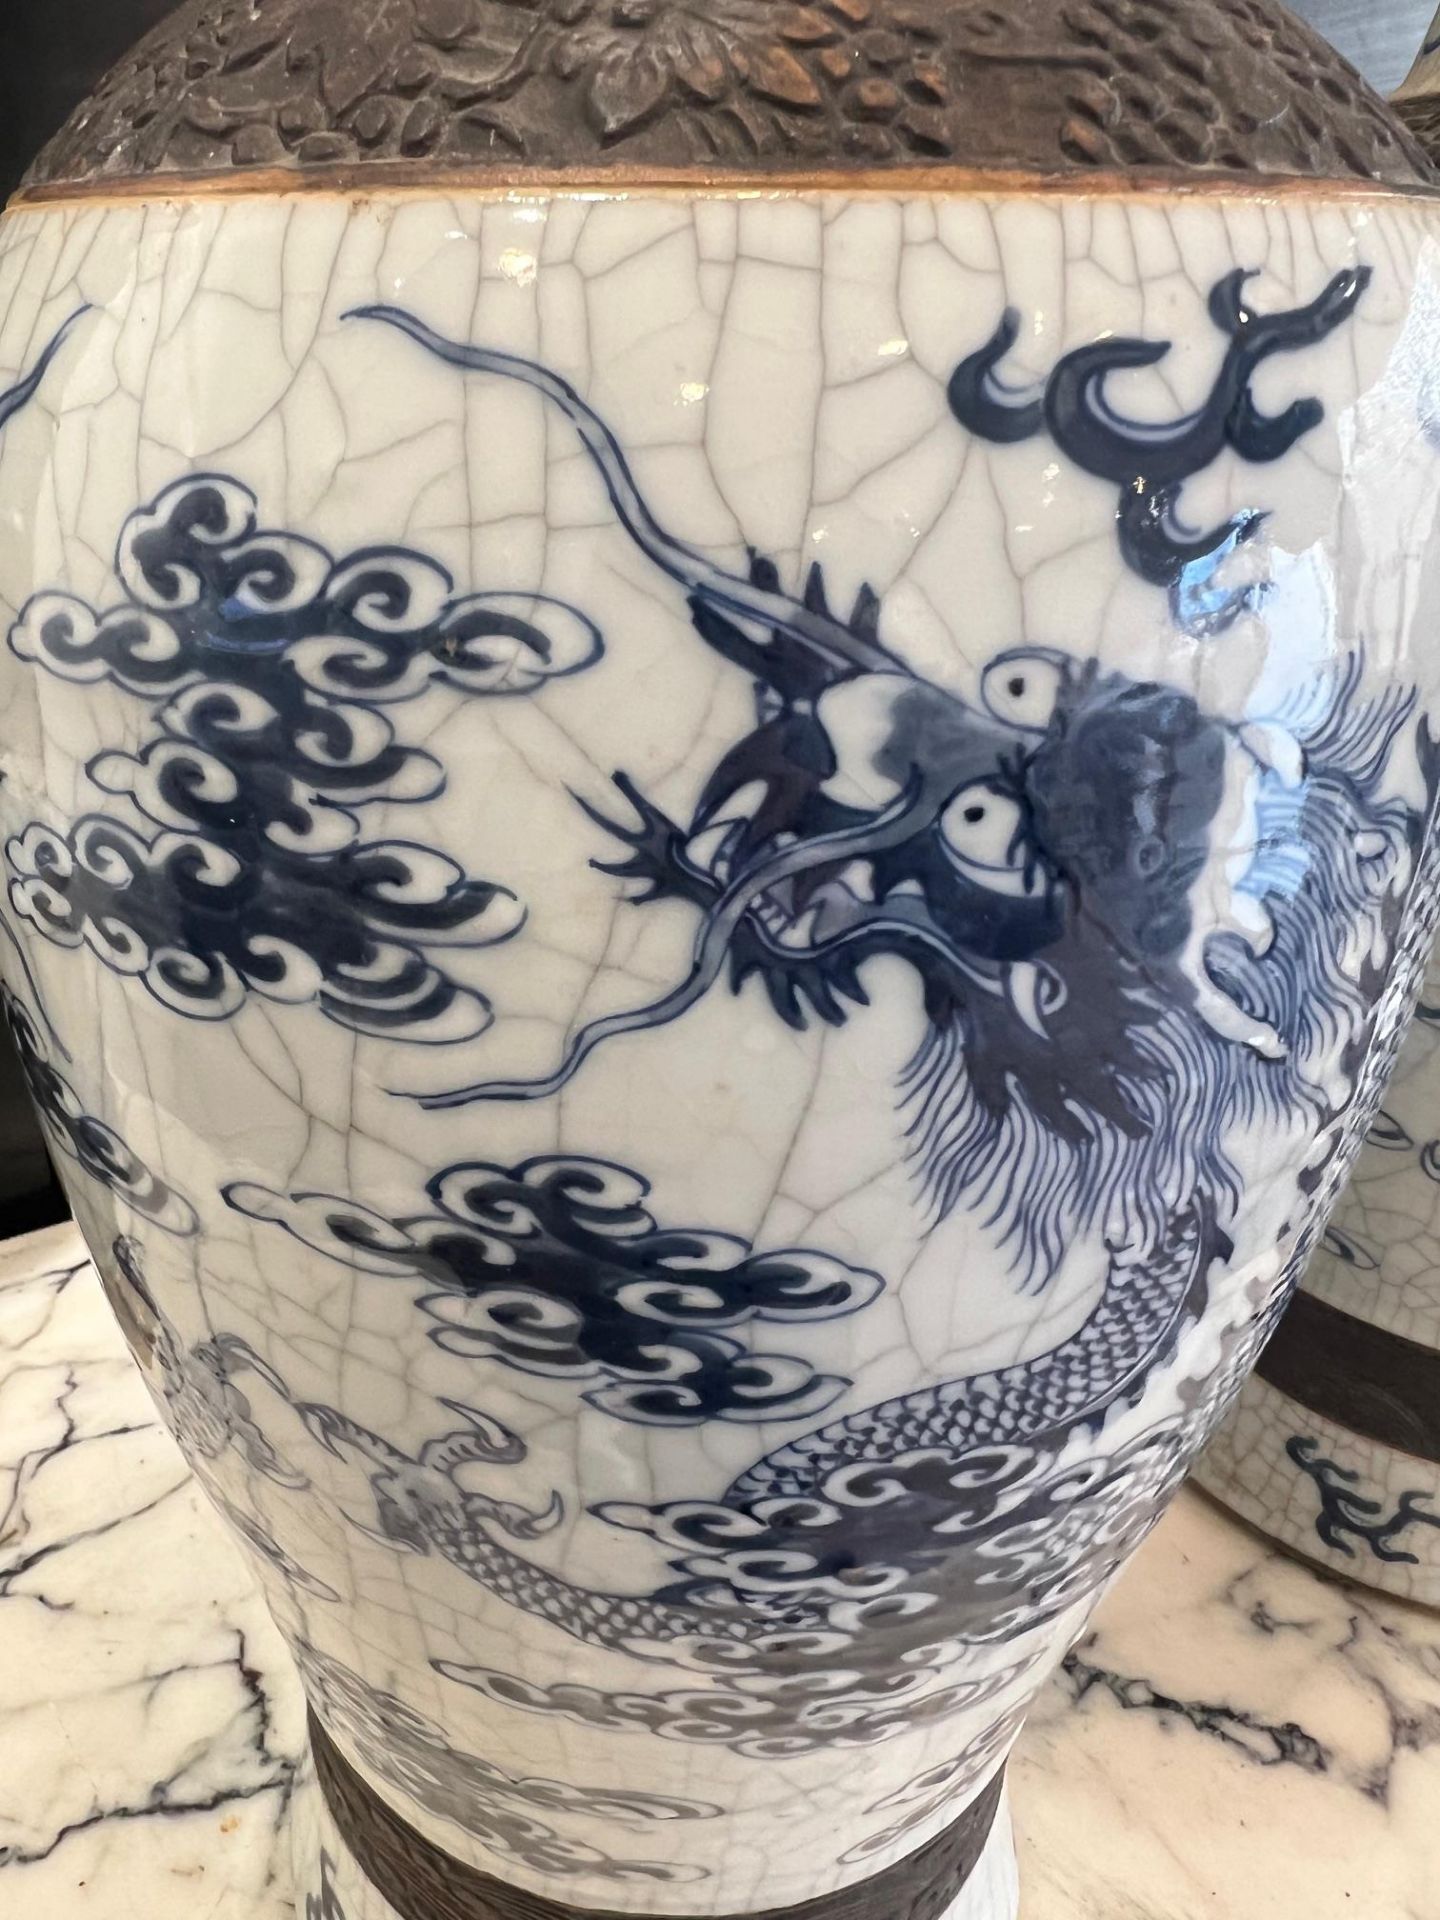 A LARGE PAIR OF 19TH CENTURY CHINESE CRACKLE WARE PORCELAIN VASES - Image 6 of 11